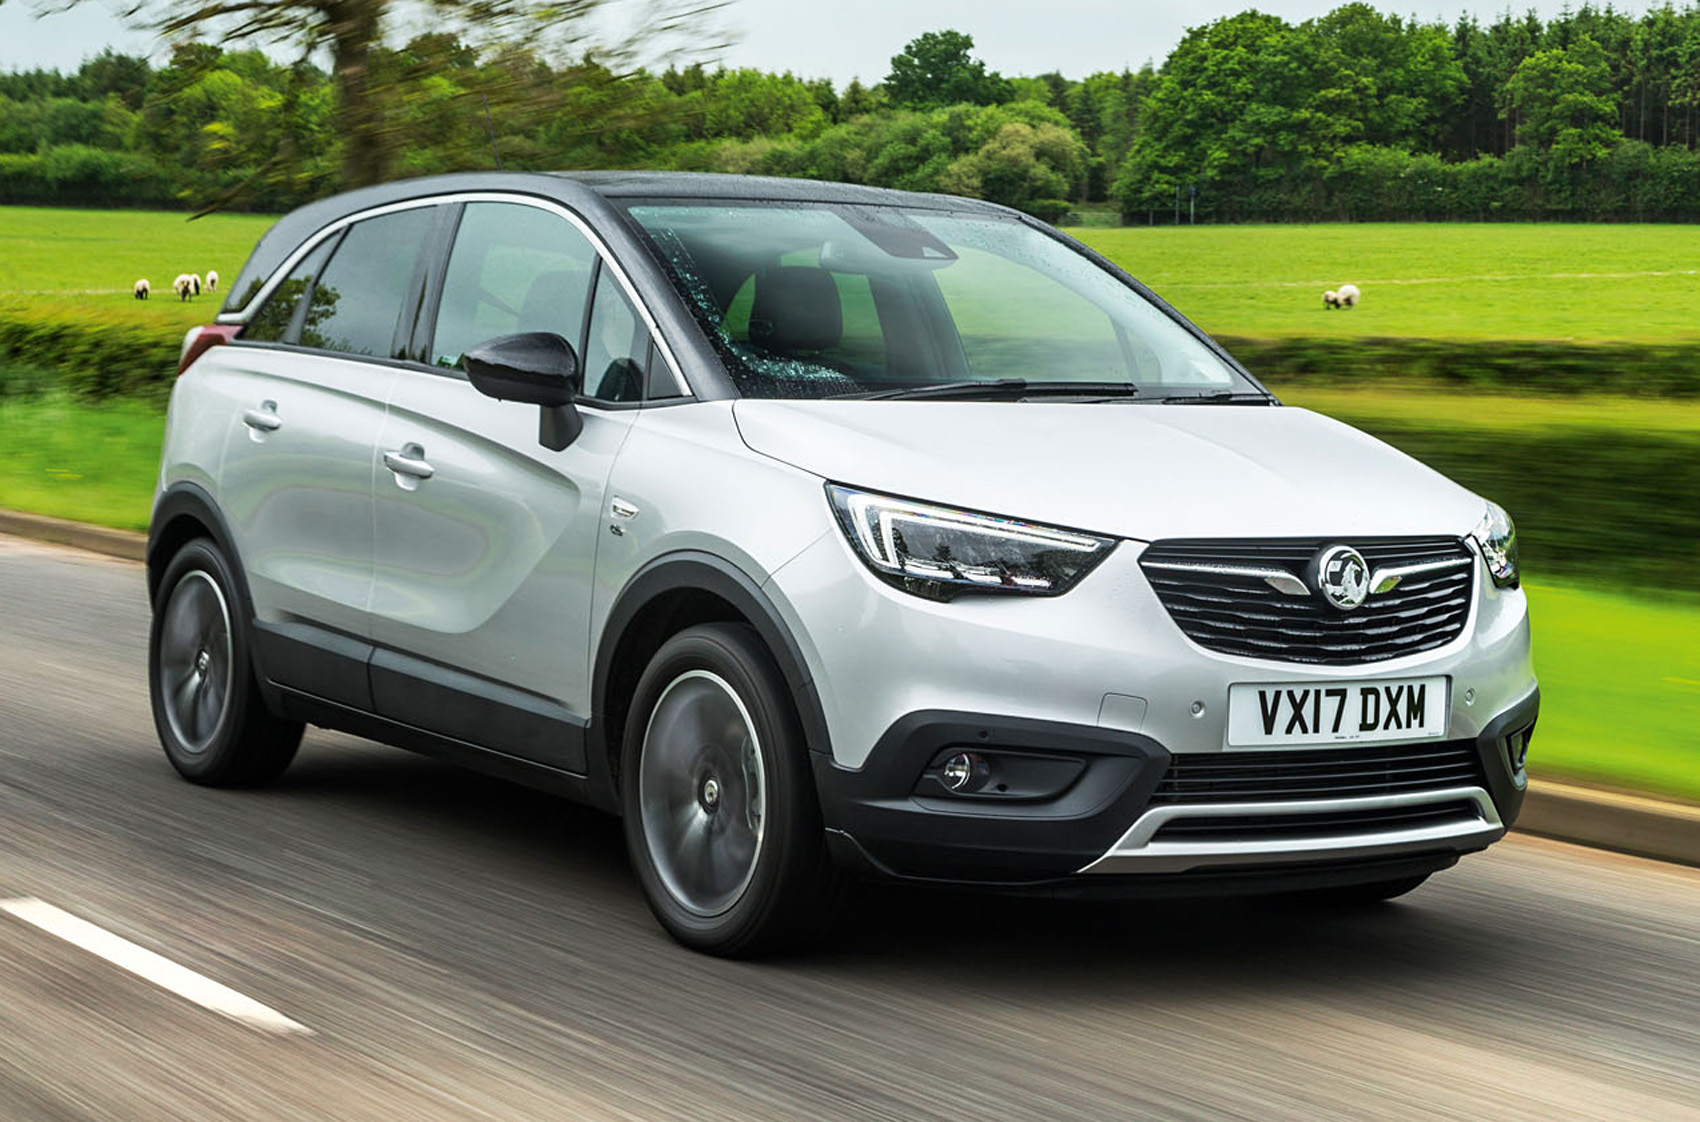 Used Vauxhall Crossland X 2017-2020 review